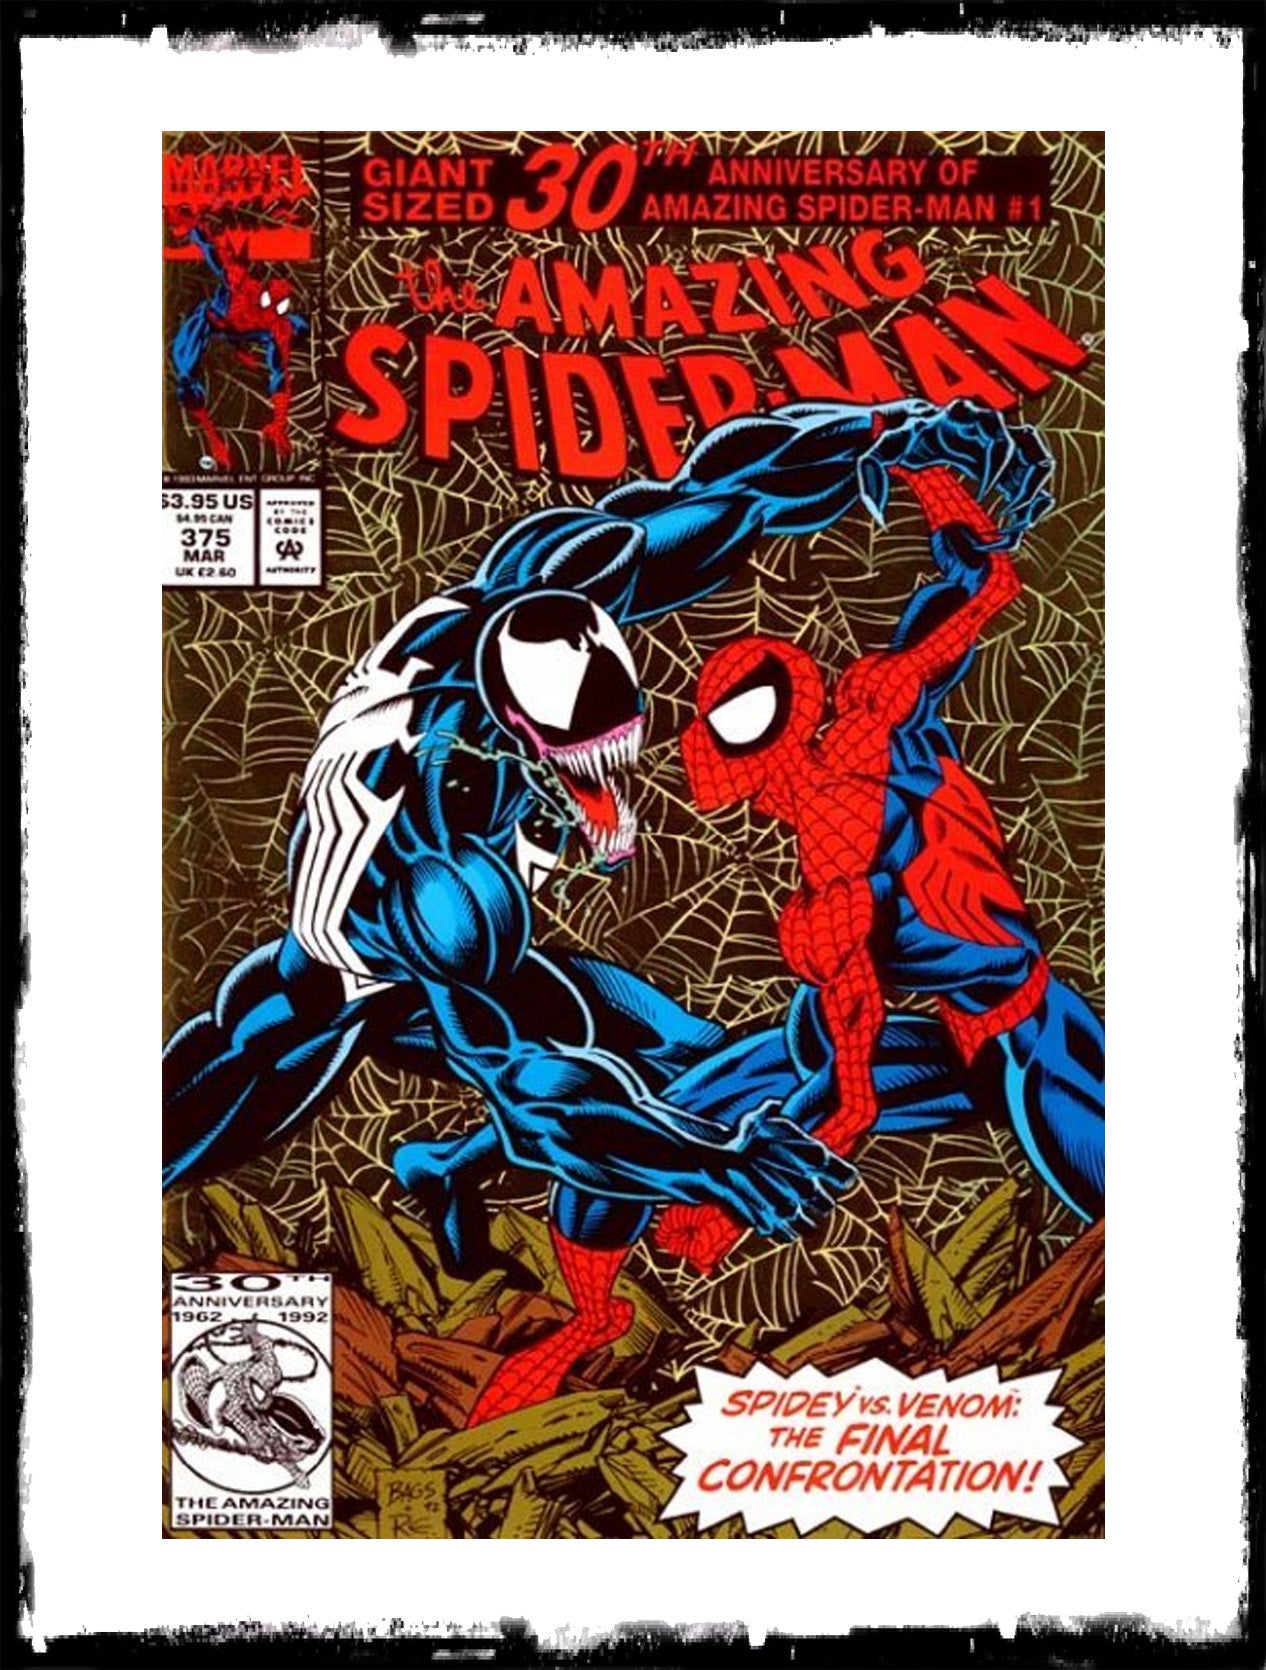 AMAZING SPIDER-MAN - #375 CLASSIC BOOK / FIRST ANN WEYING (1993 - VF+/NM)